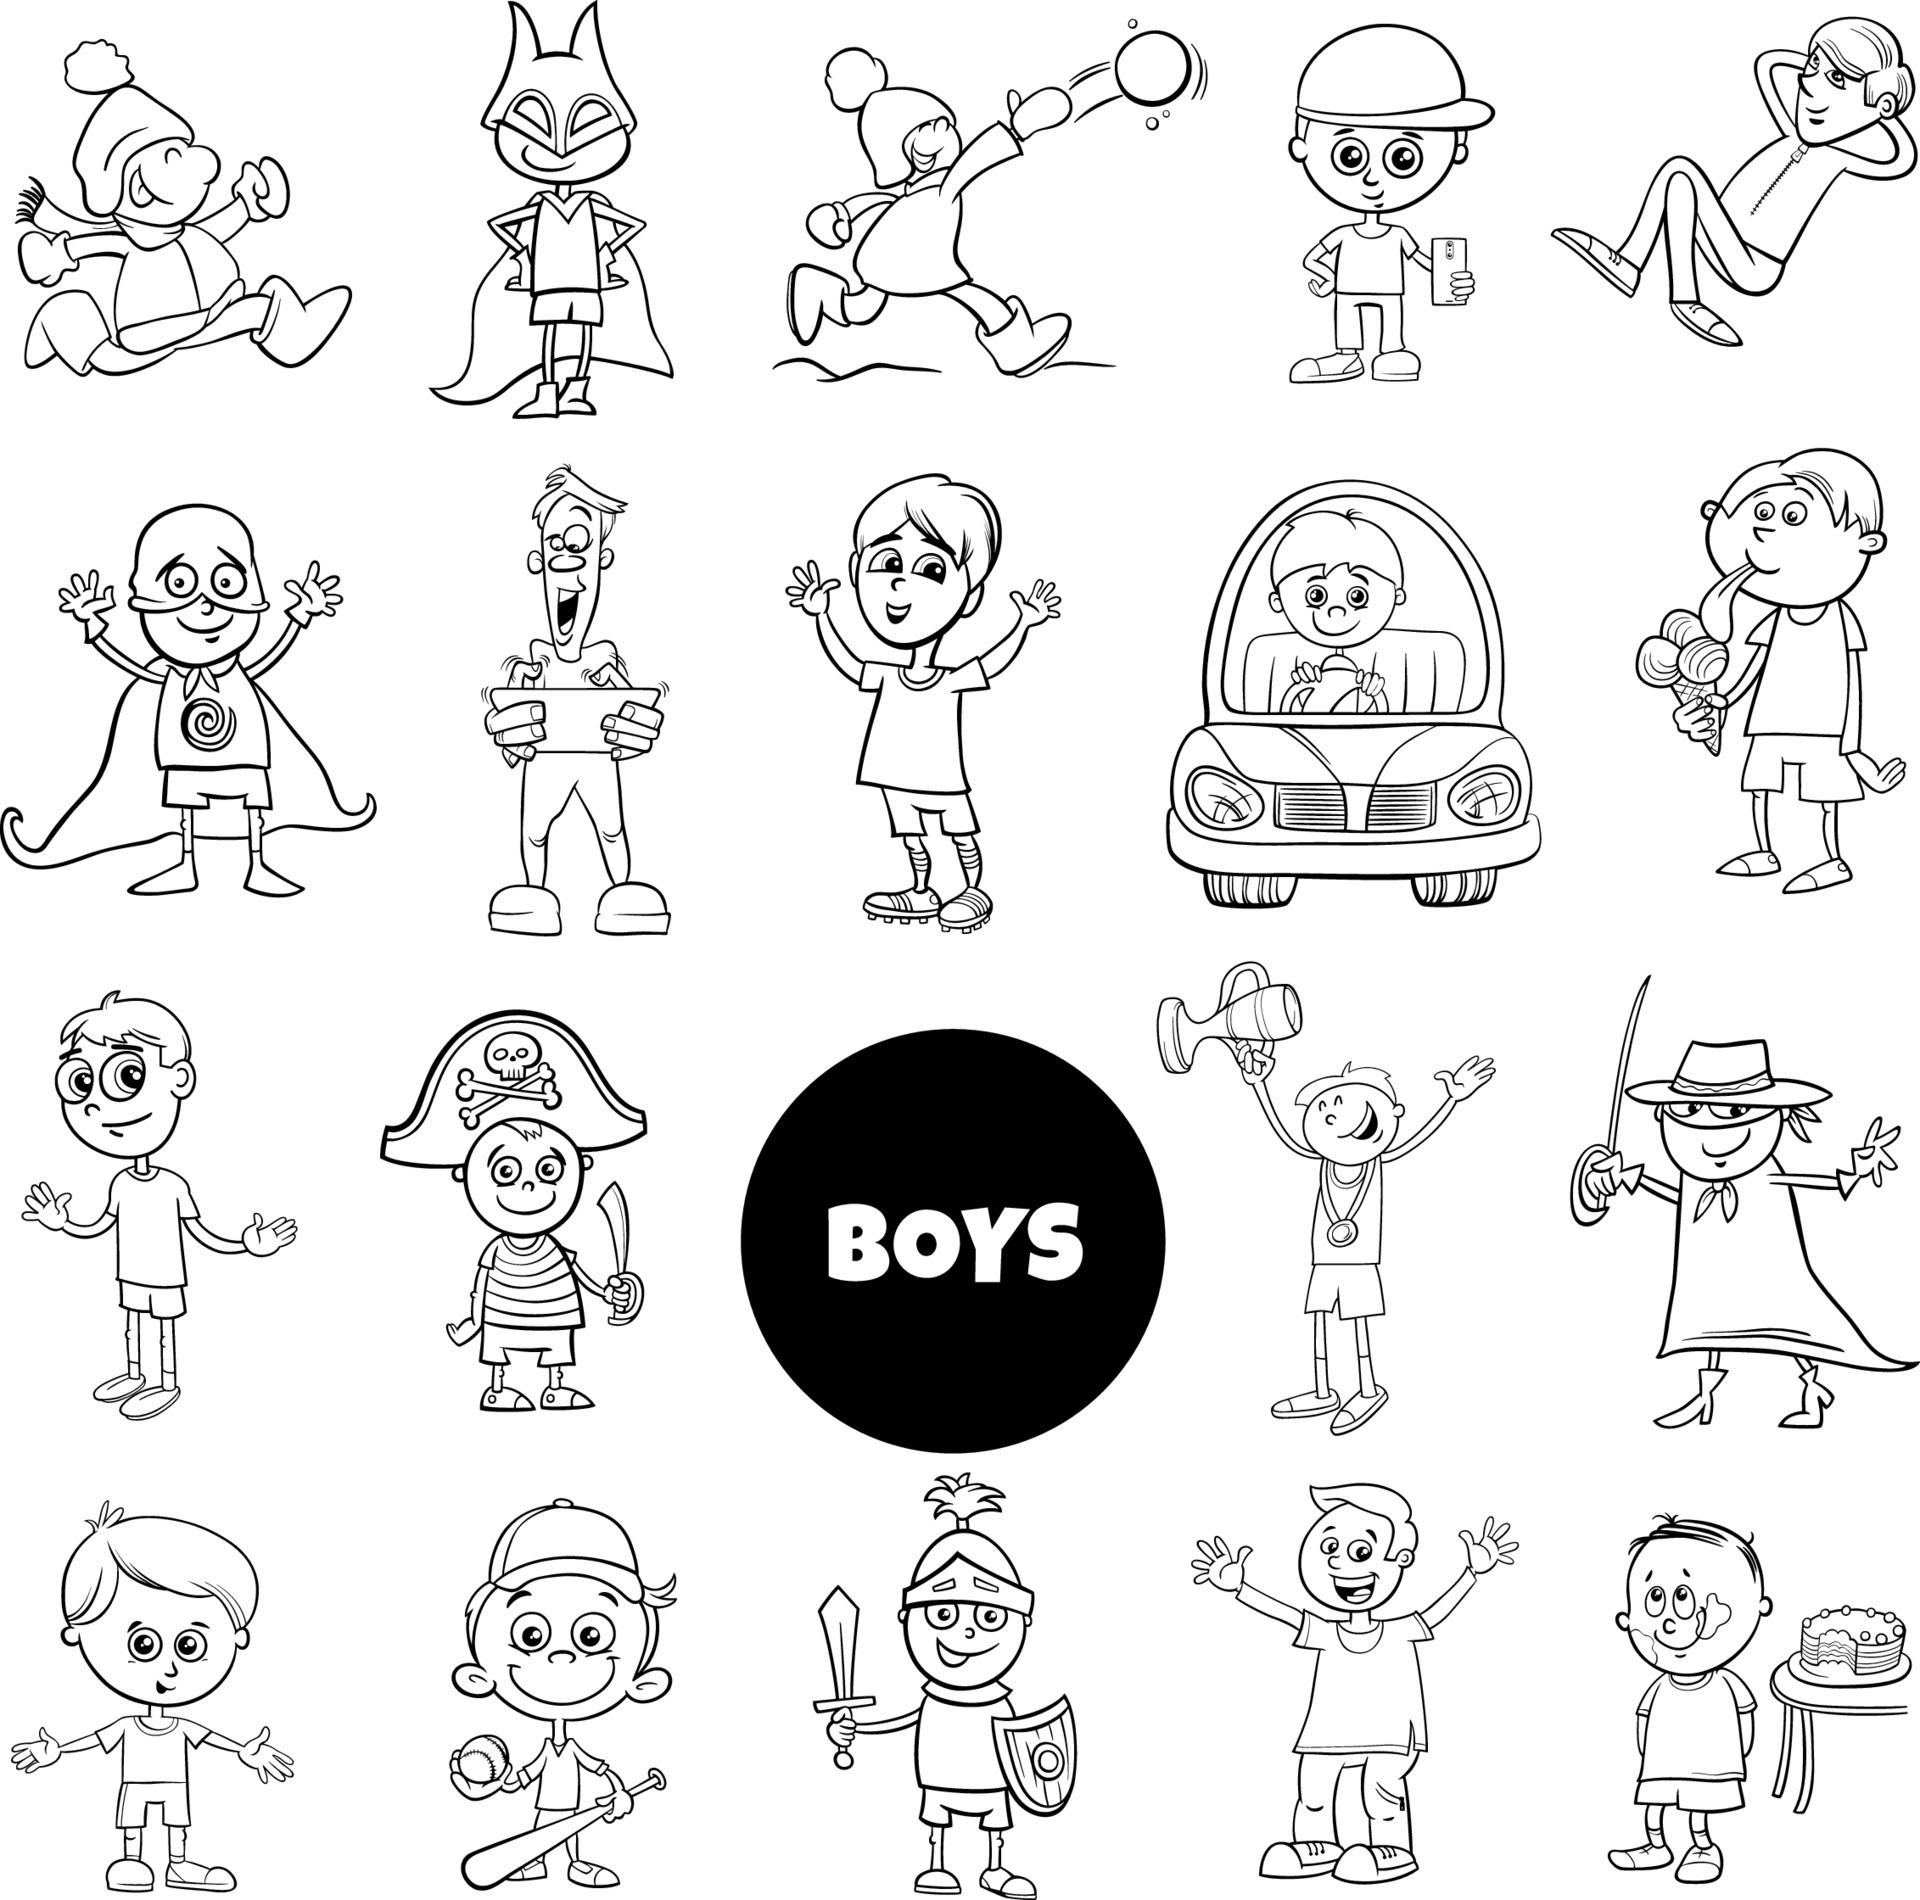 https://static.vecteezy.com/system/resources/previews/017/112/890/original/cartoon-teen-and-elementary-age-boys-set-coloring-book-vector.jpg